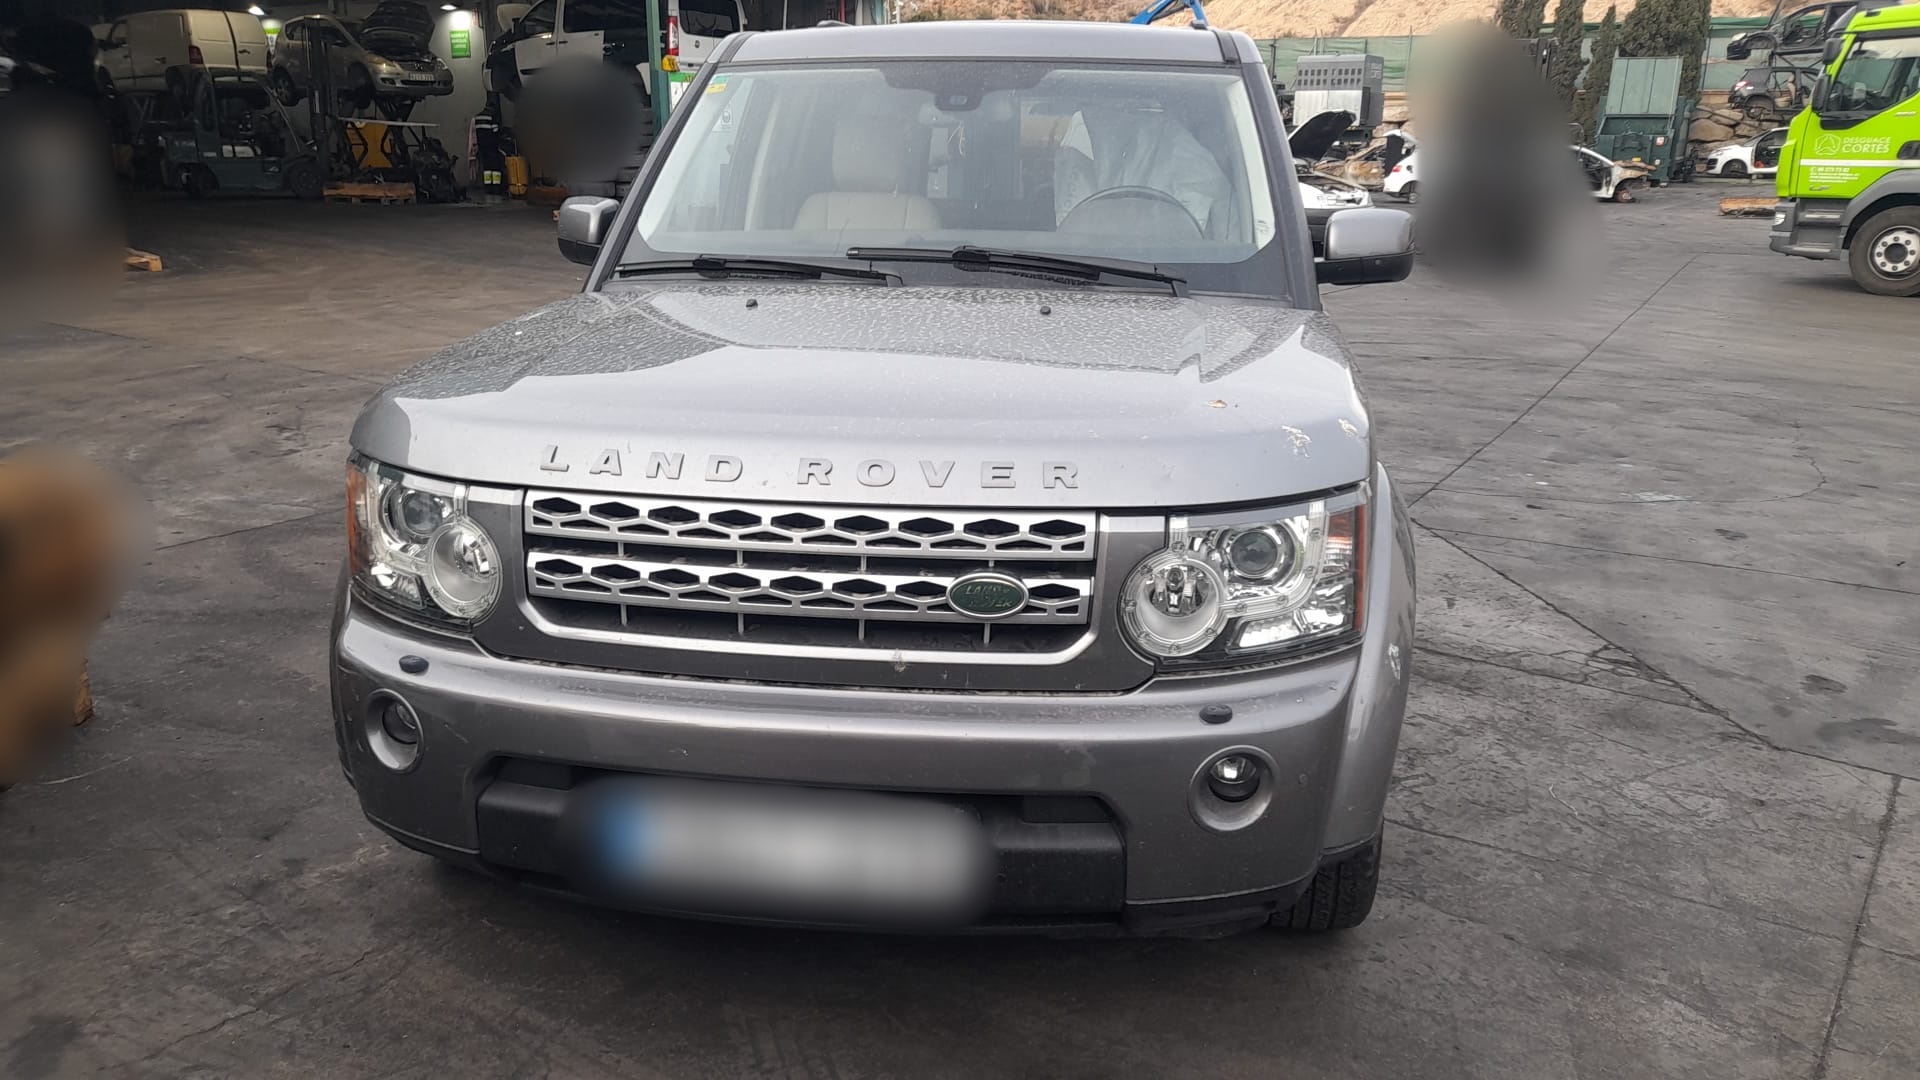 LAND ROVER Discovery 4 generation (2009-2016) Раздатка IAB500280, 4H227K780CA, A0640652 24548465